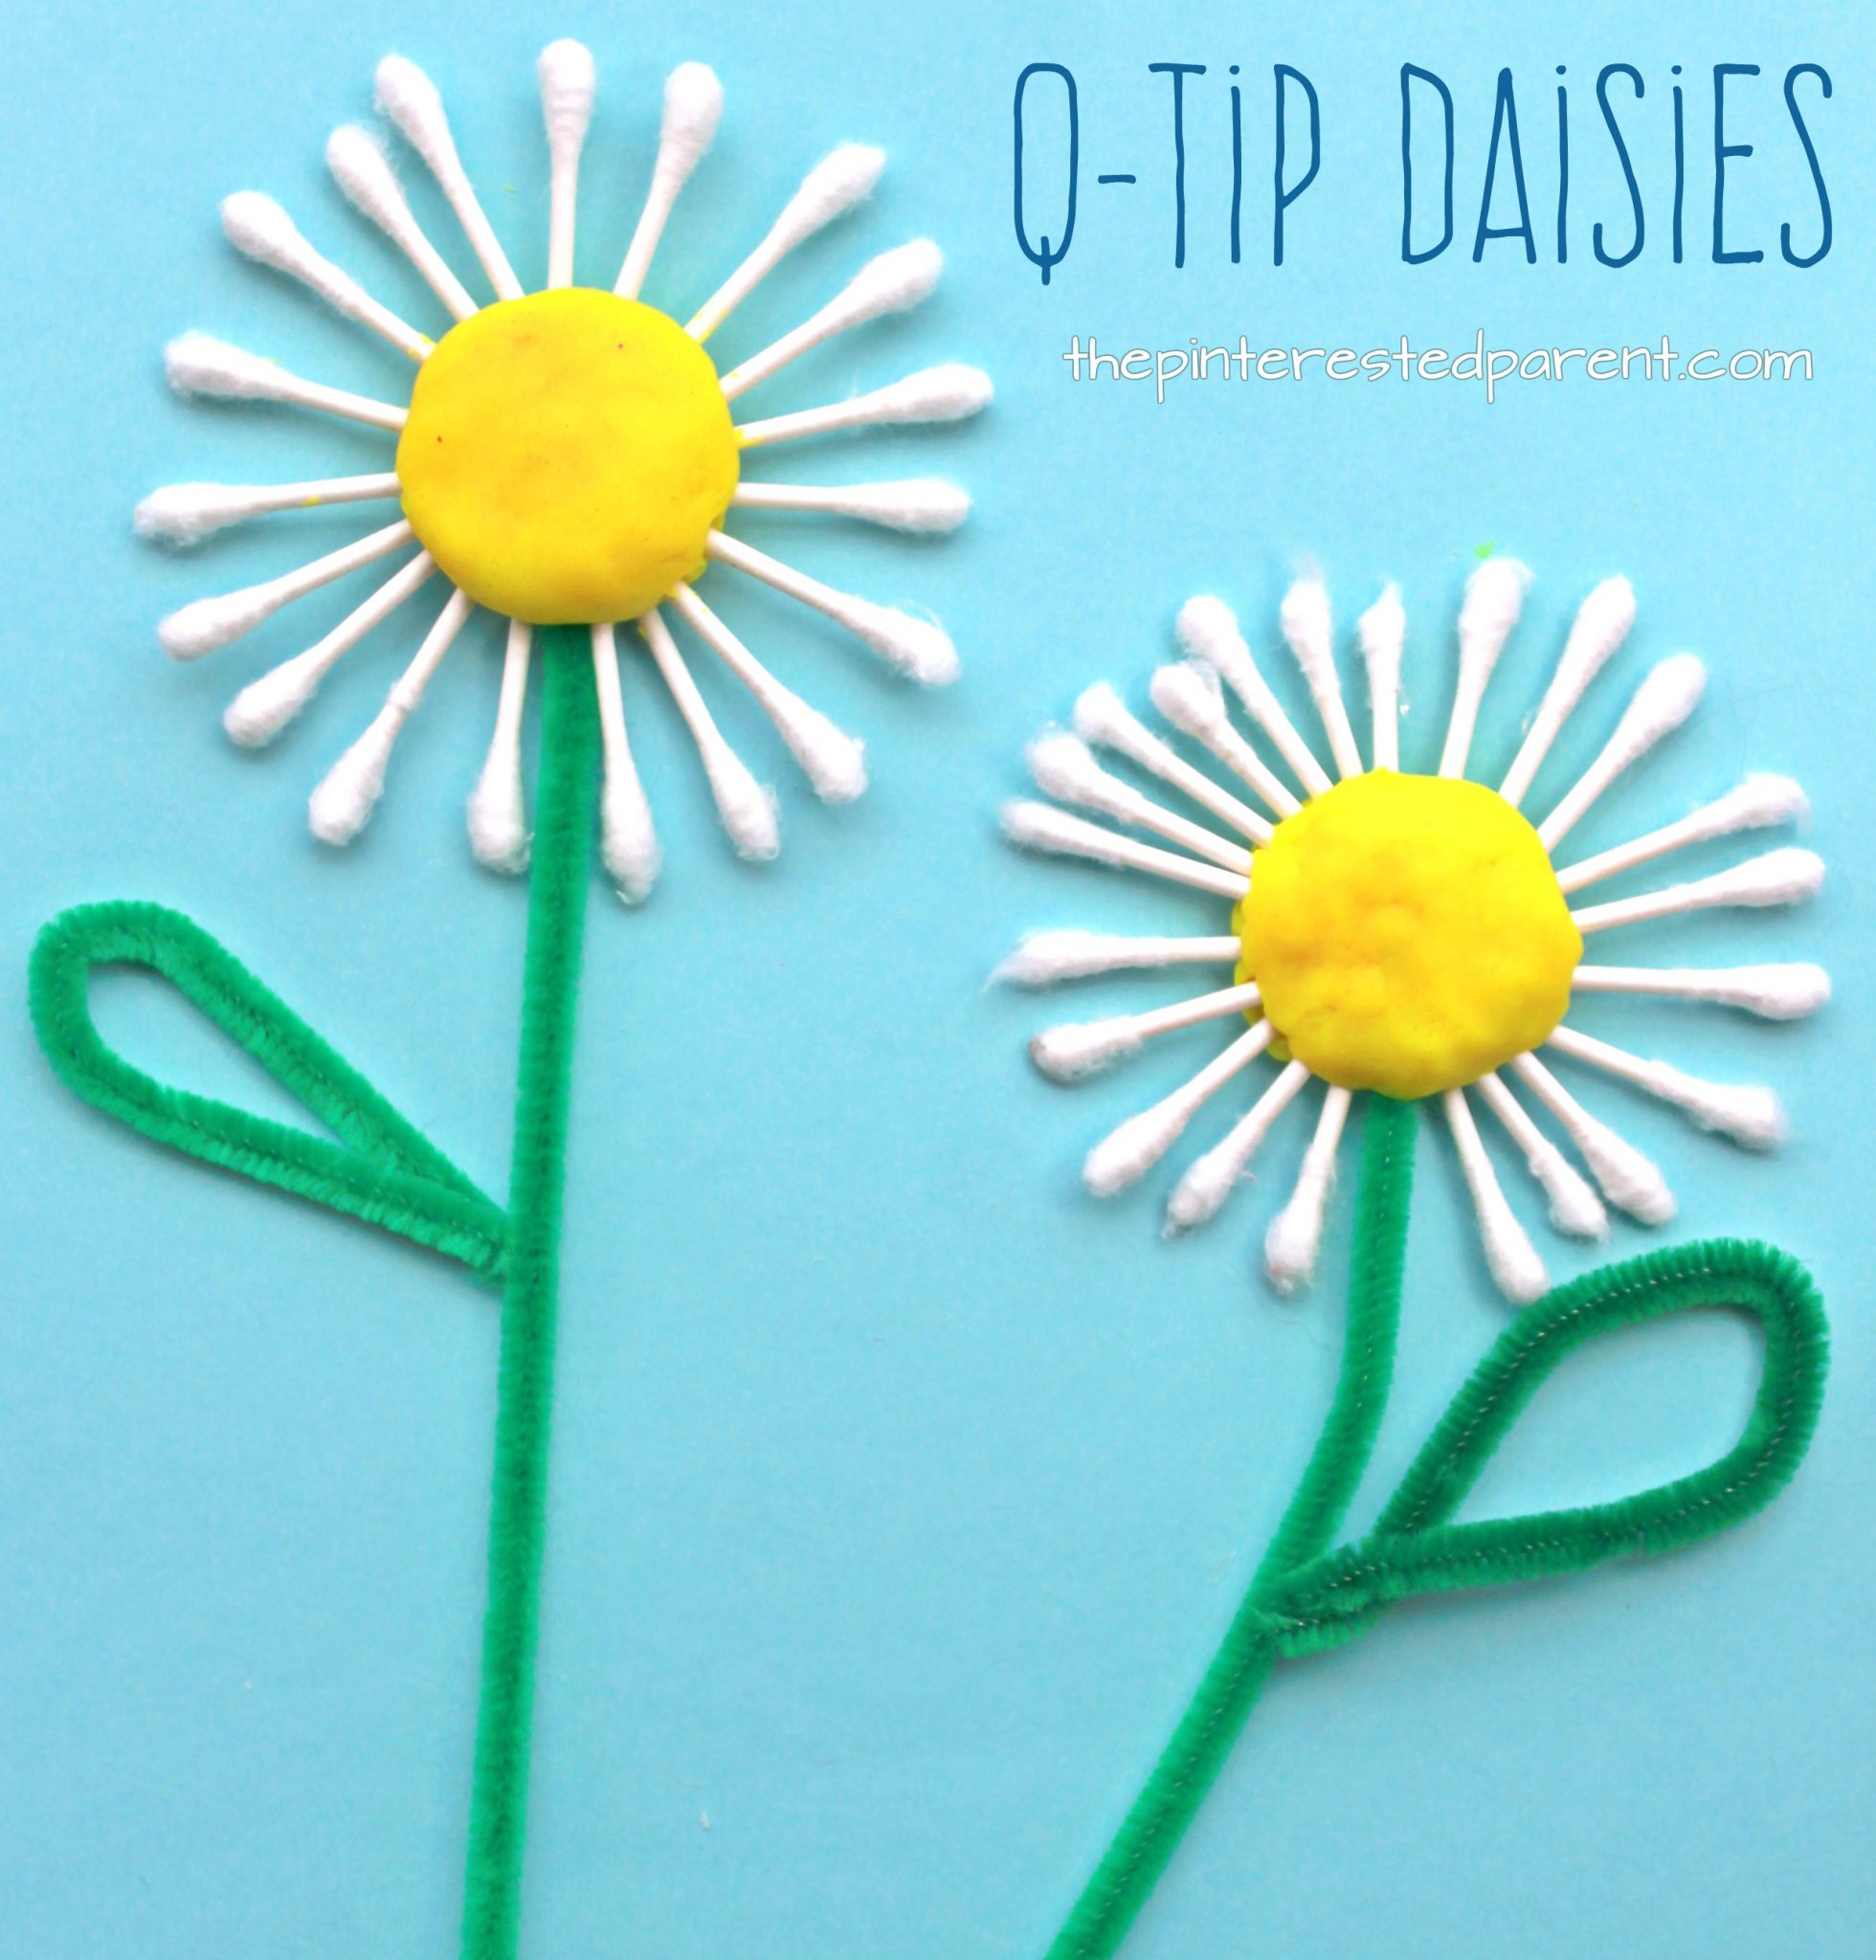 Q-Tip Daisy Craft – The Pinterested Parent